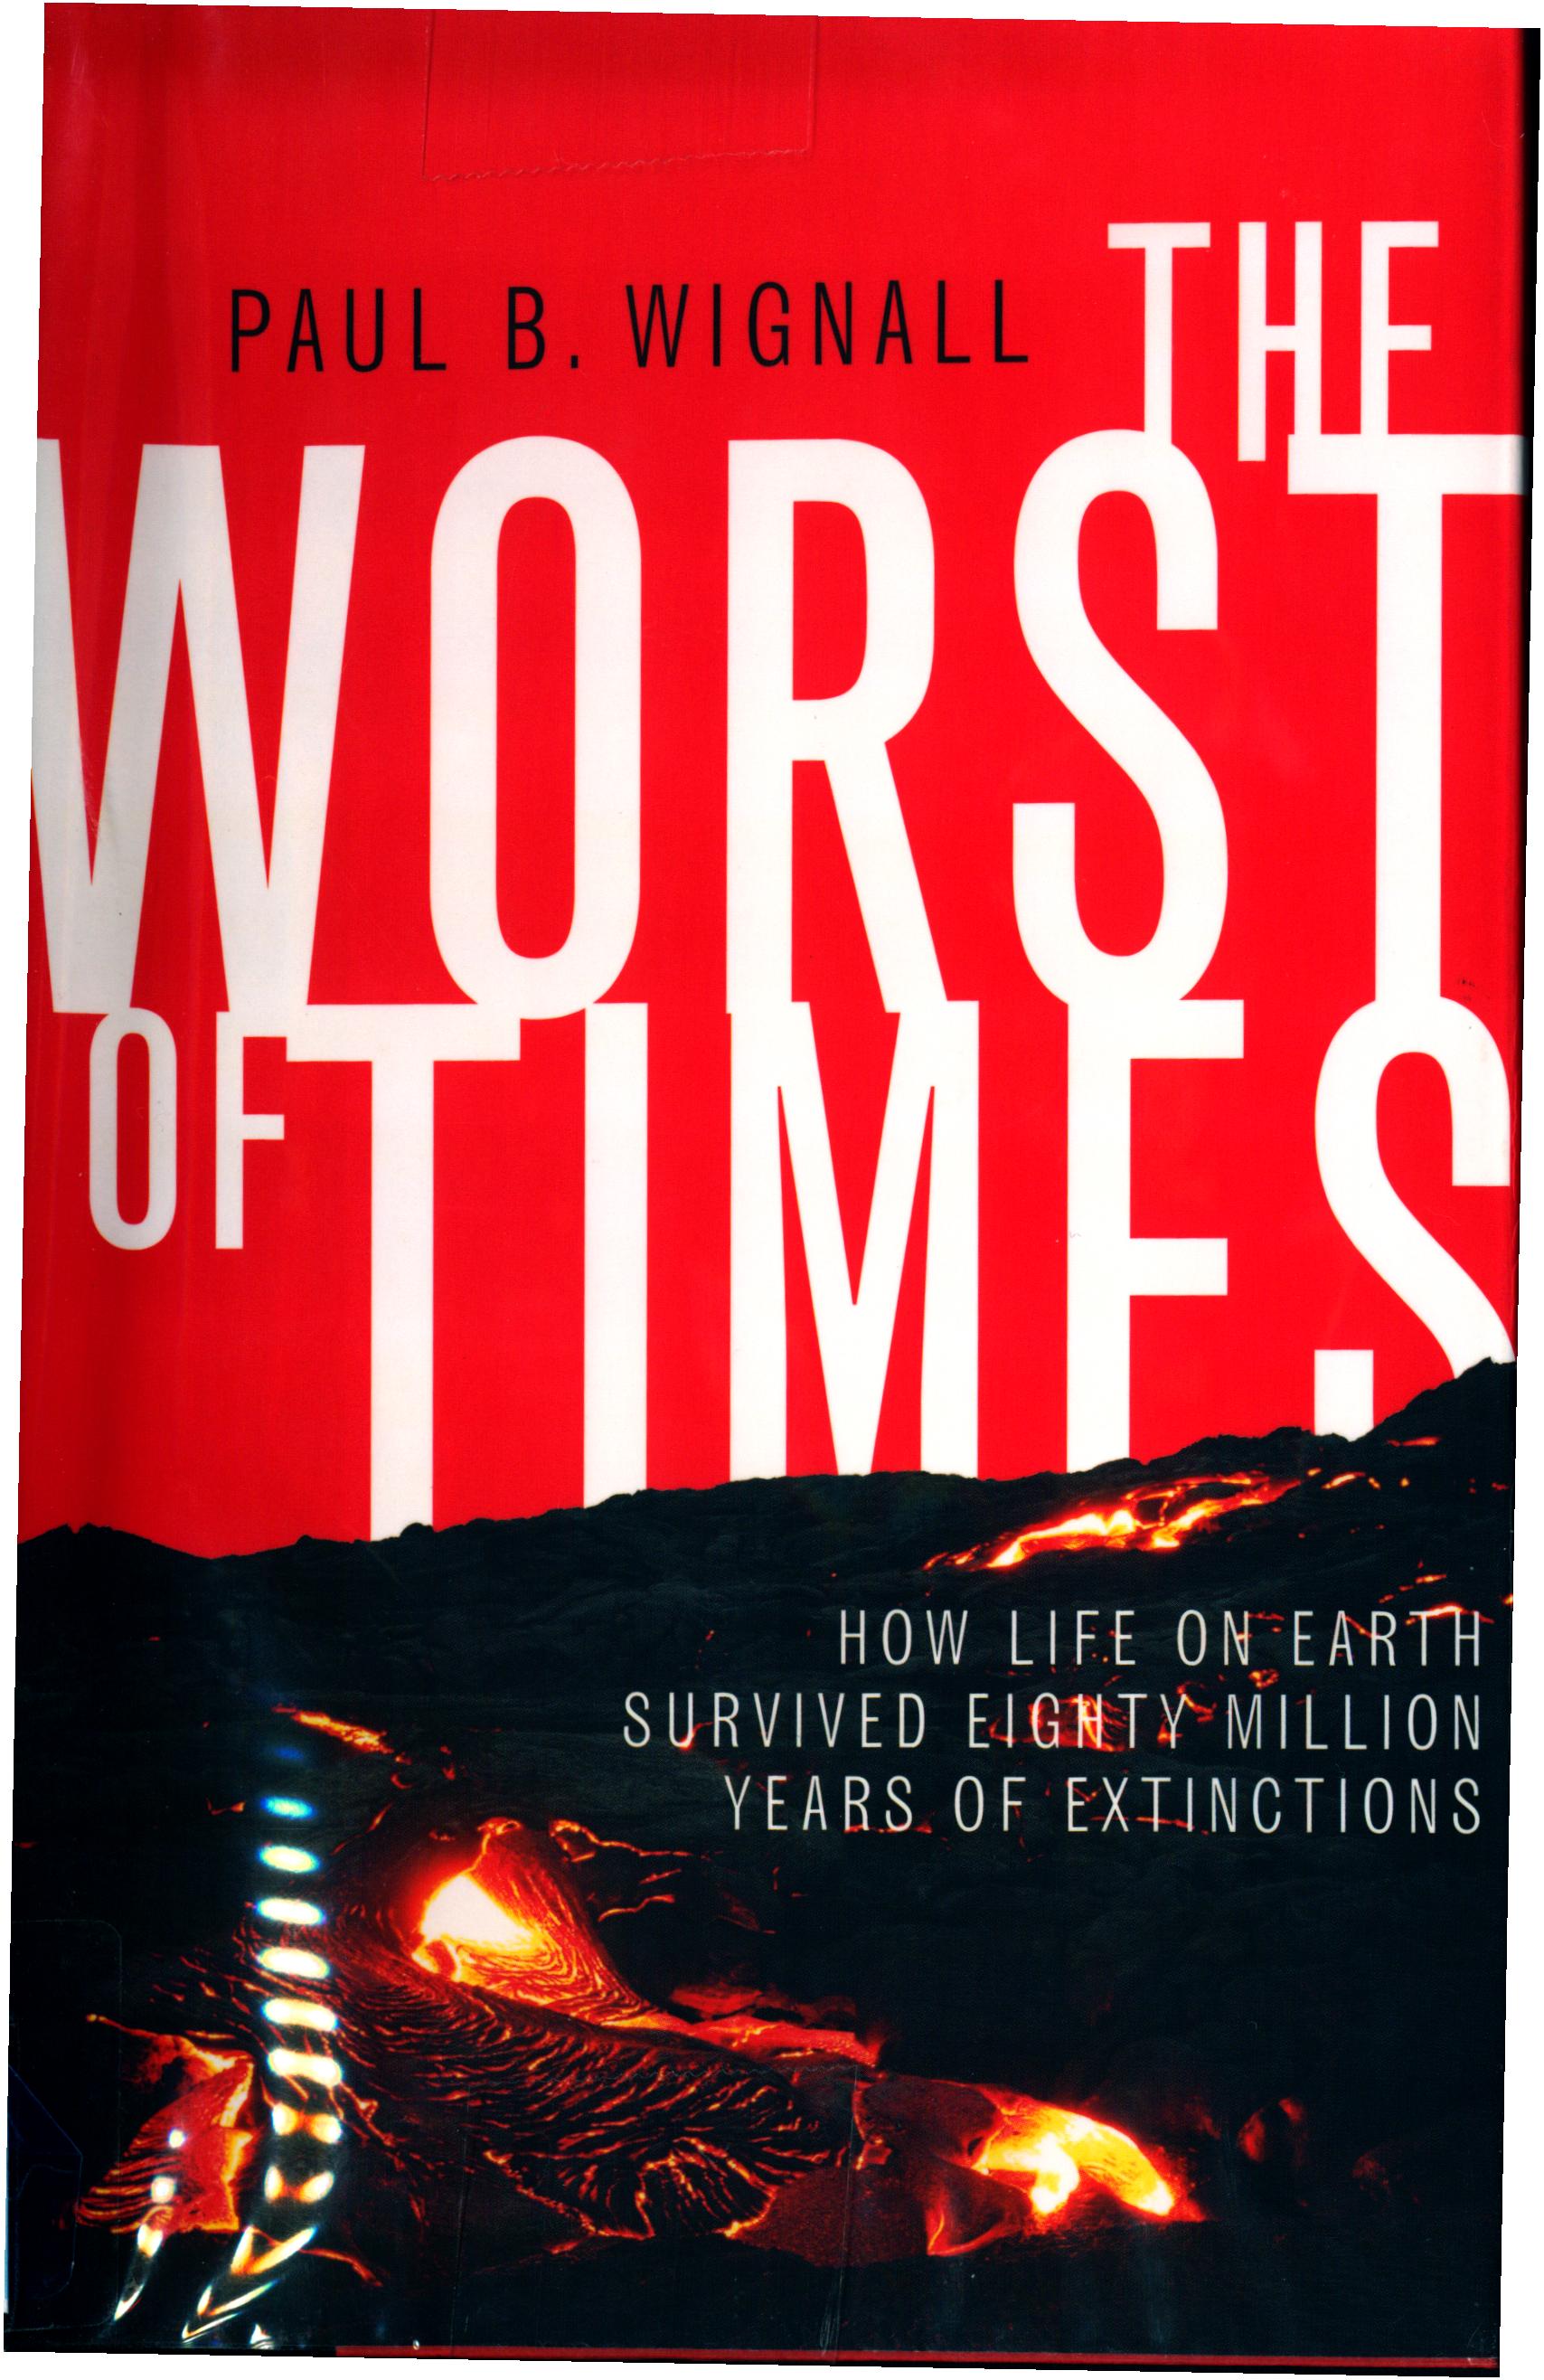 The Worst of Times: How Life on Earth Survived Eighty Million Years of Extinctions